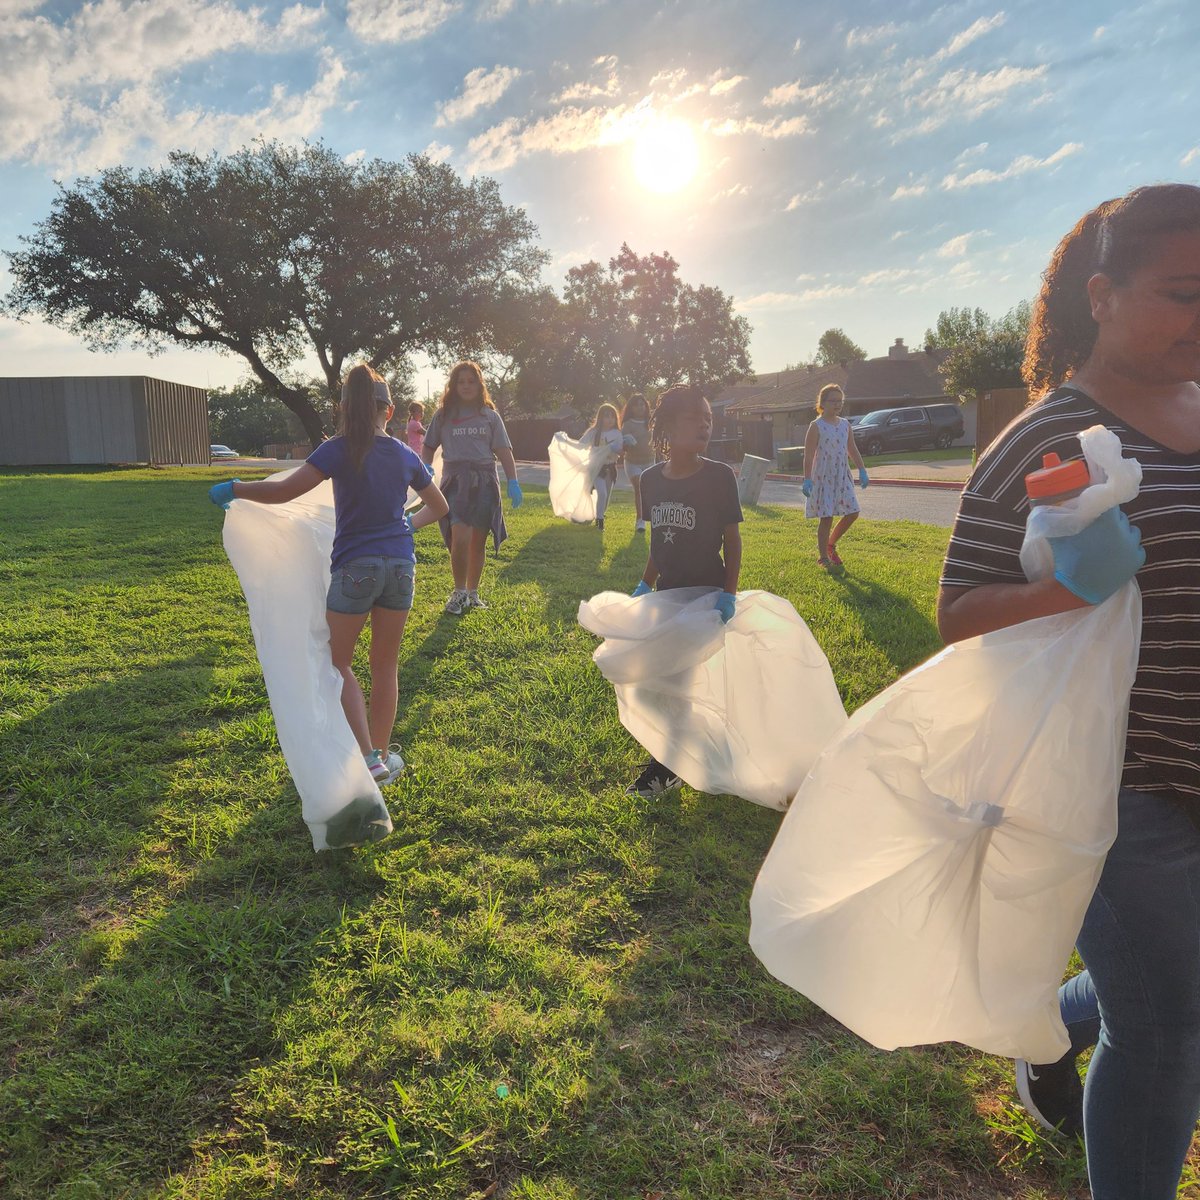 BEE-utiful day to start our Walkabout Club and end Kindness Week by picking up trash. #wearedegan